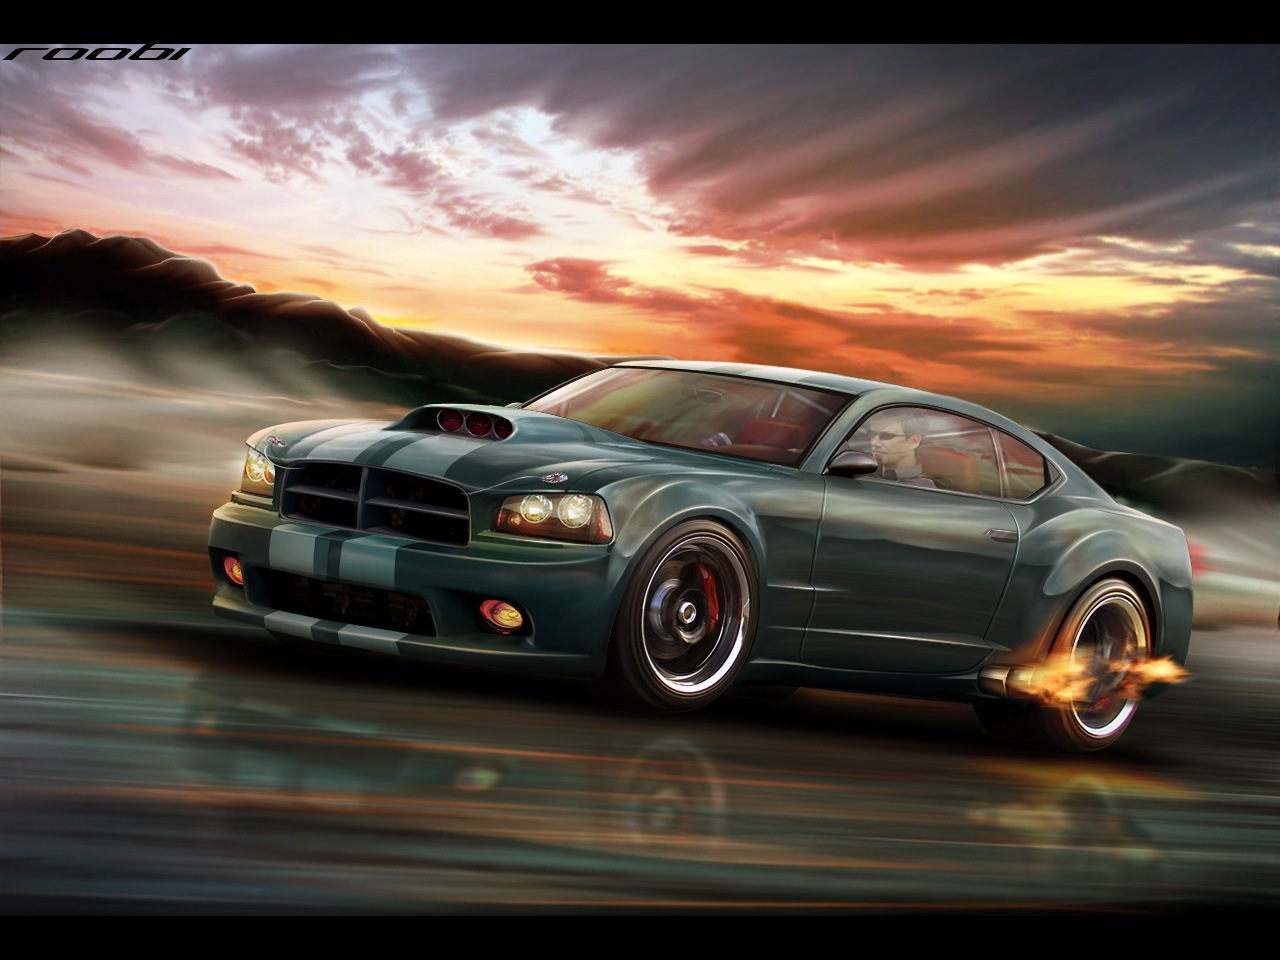 [Dodge_Charger_by_roobi[2].jpg]